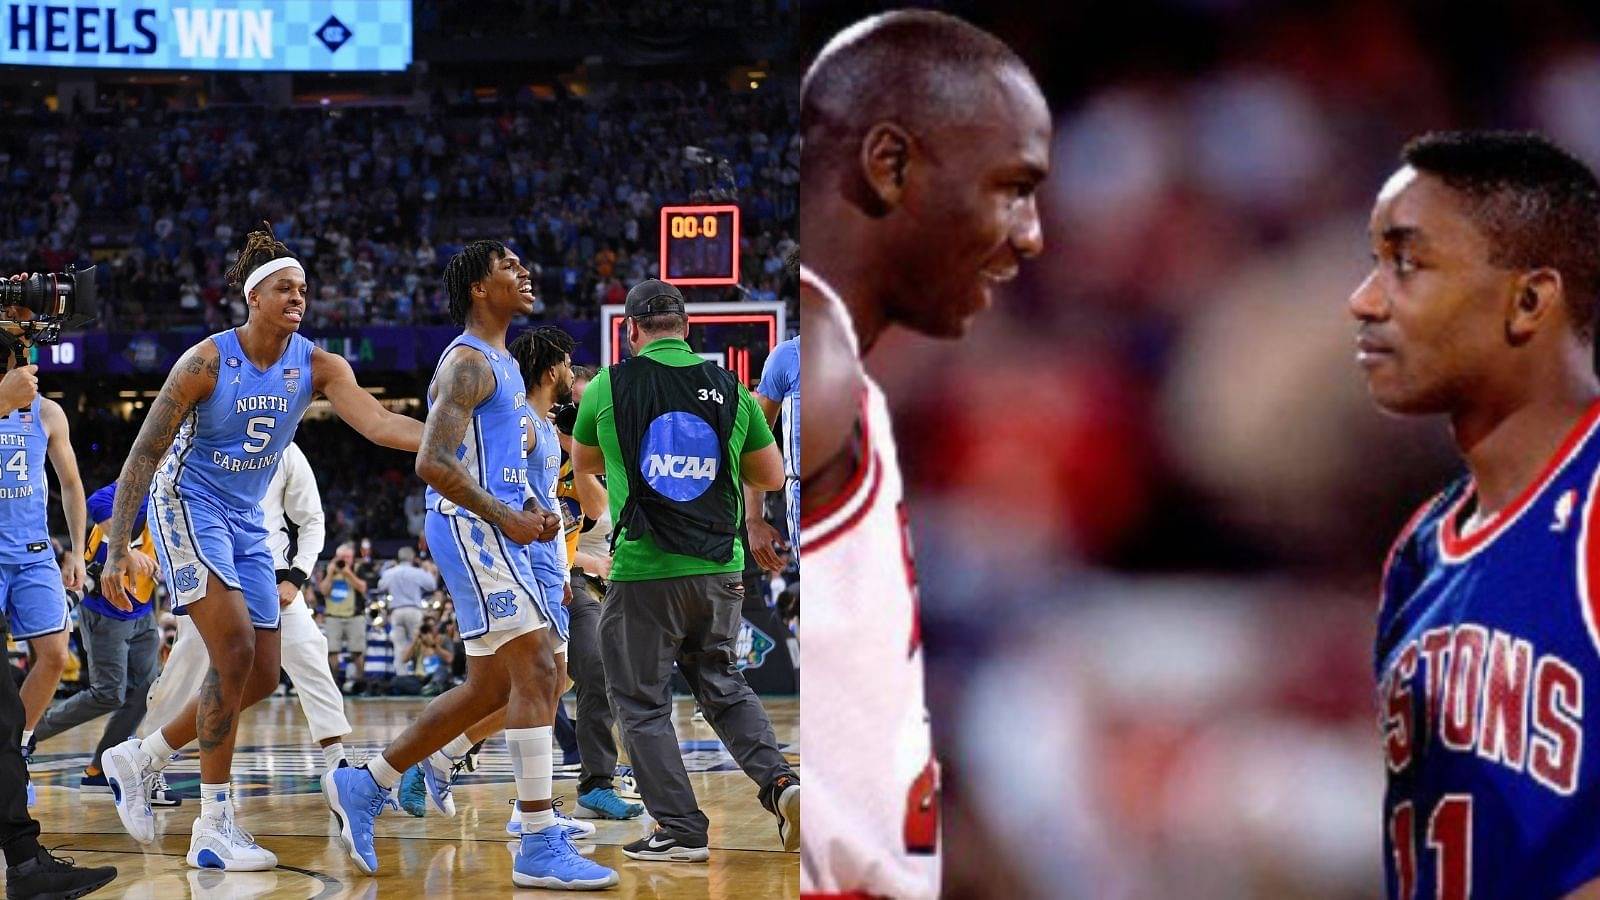 "Duke pulled an Isiah Thomas vs Michael Jordan": Blue Devils snub handshakes with UNC players as they failed to reach NCAA Finals in Coach K's last game